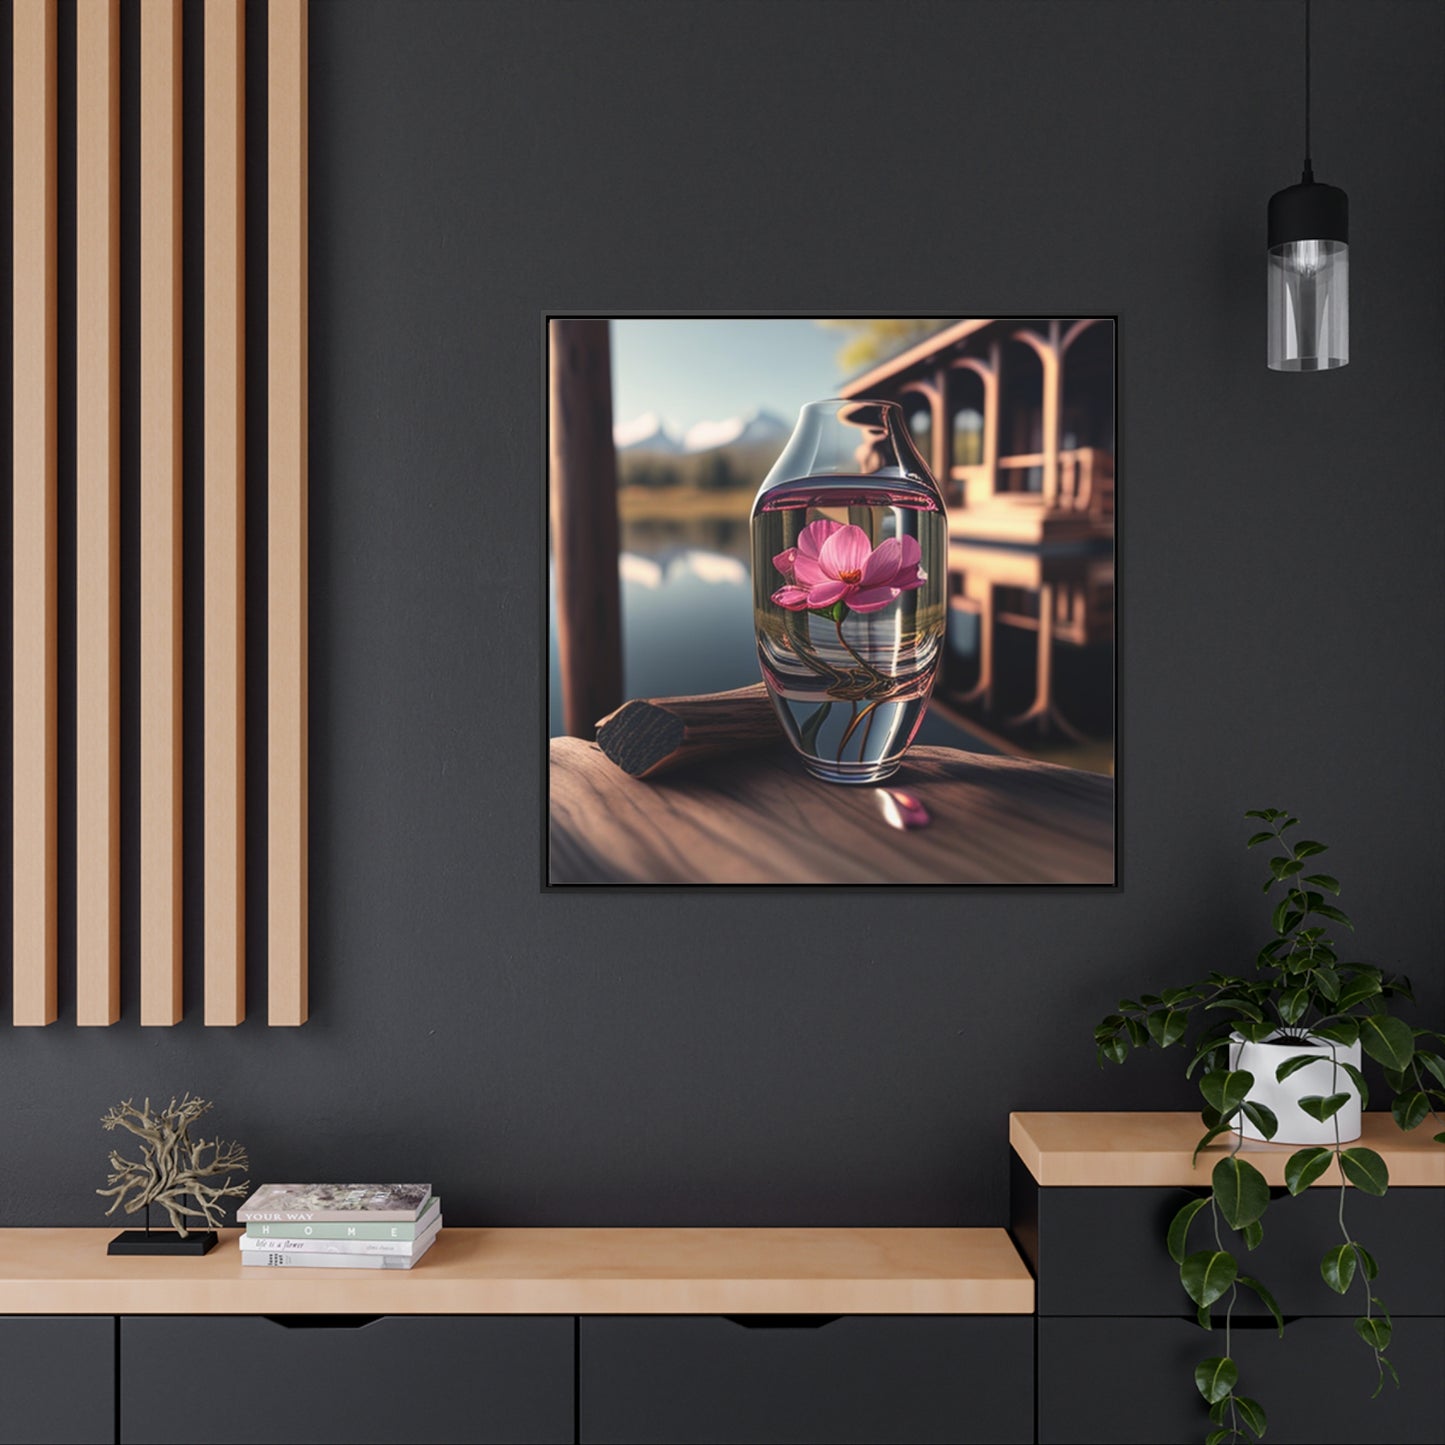 Gallery Canvas Wraps, Square Frame Pink Magnolia 3